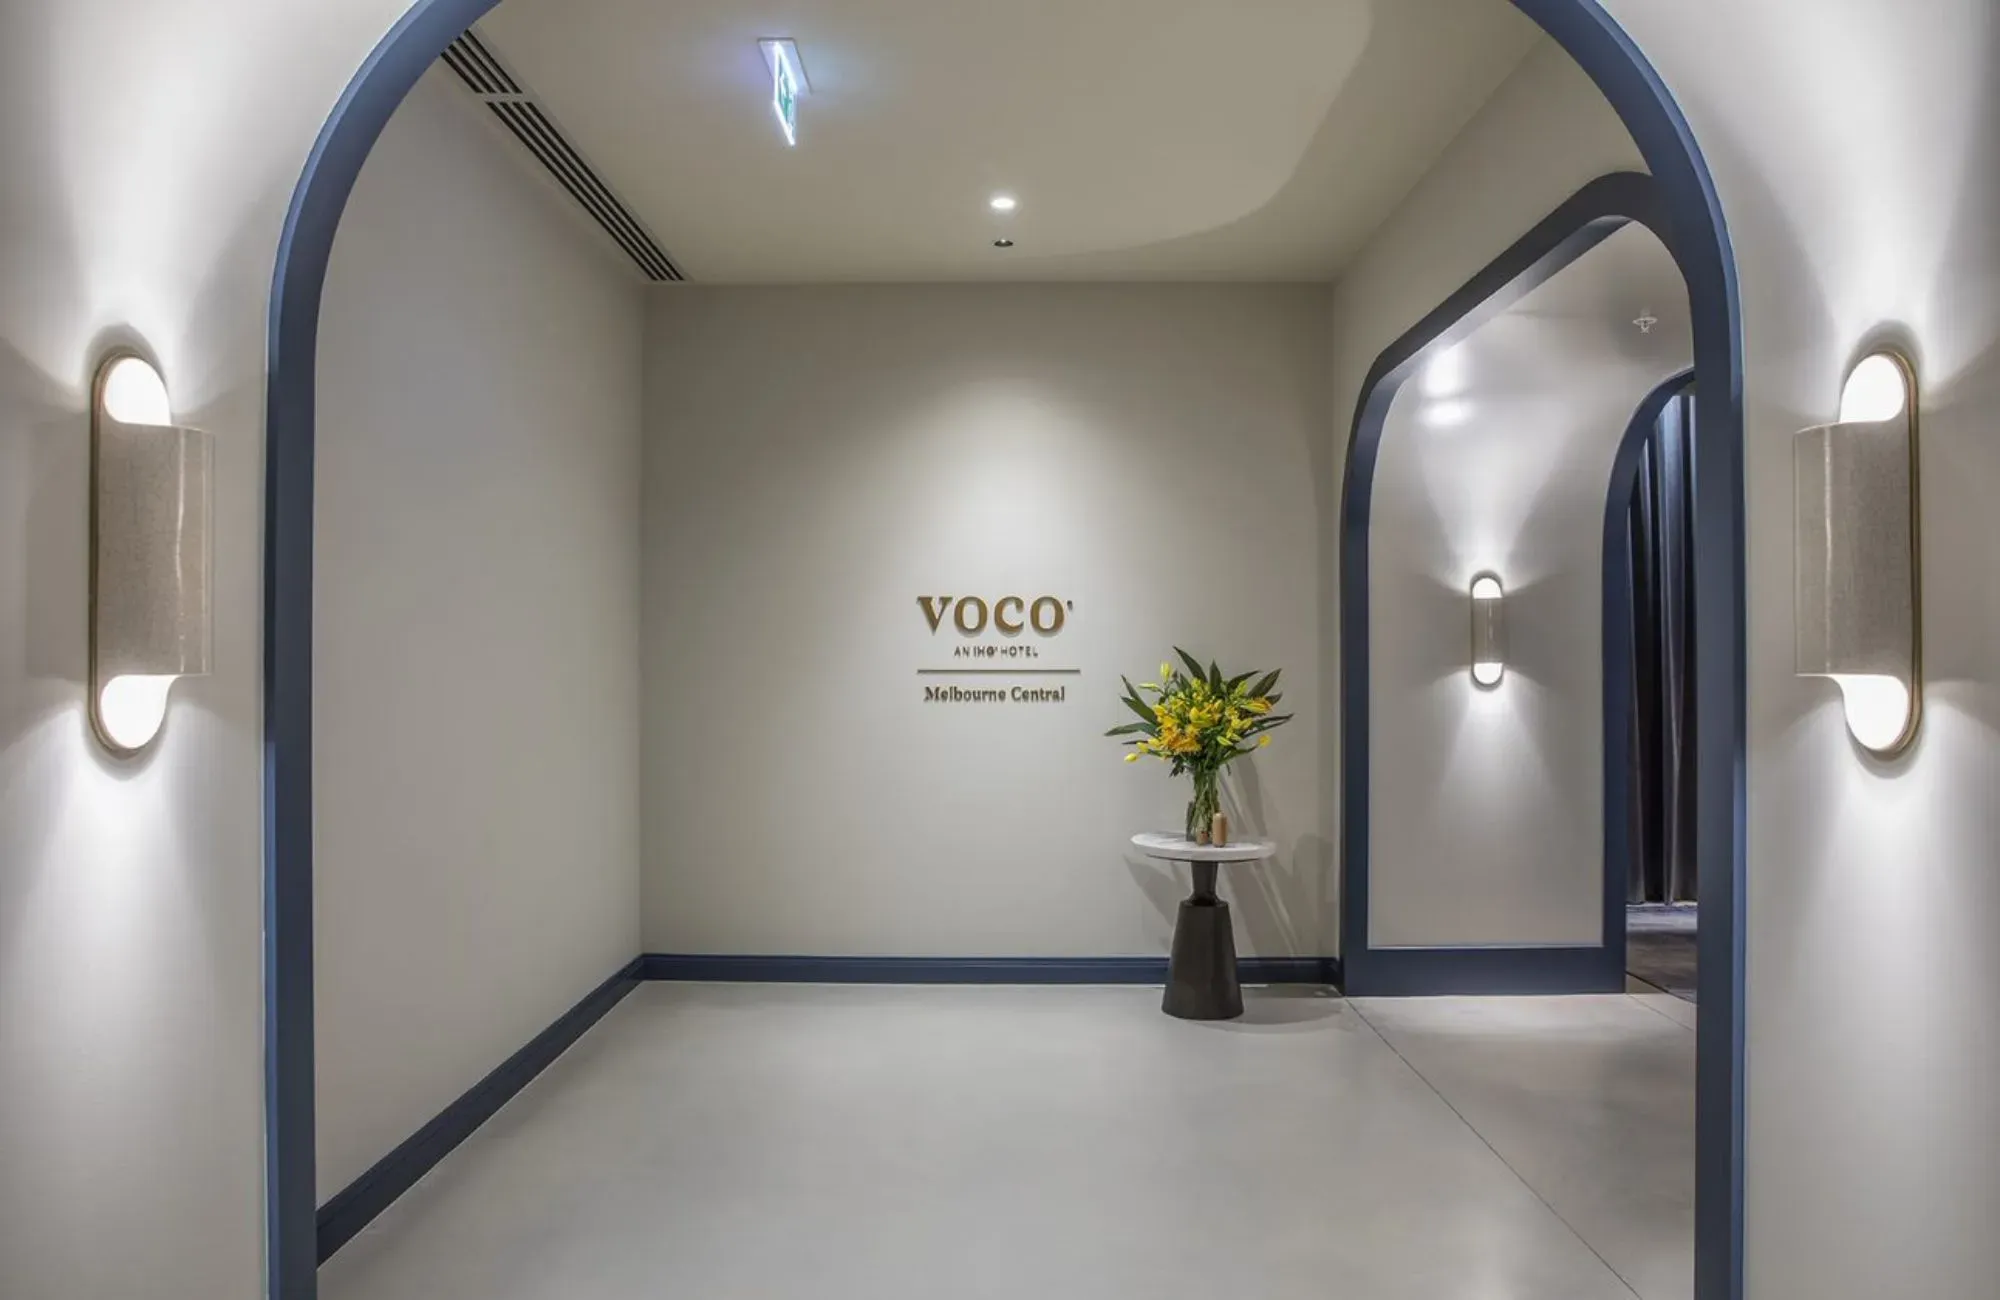 Voco Melbourne Central by IHG Hotels & Resorts. Entry foyer, featuring Voco lofo and floral display  